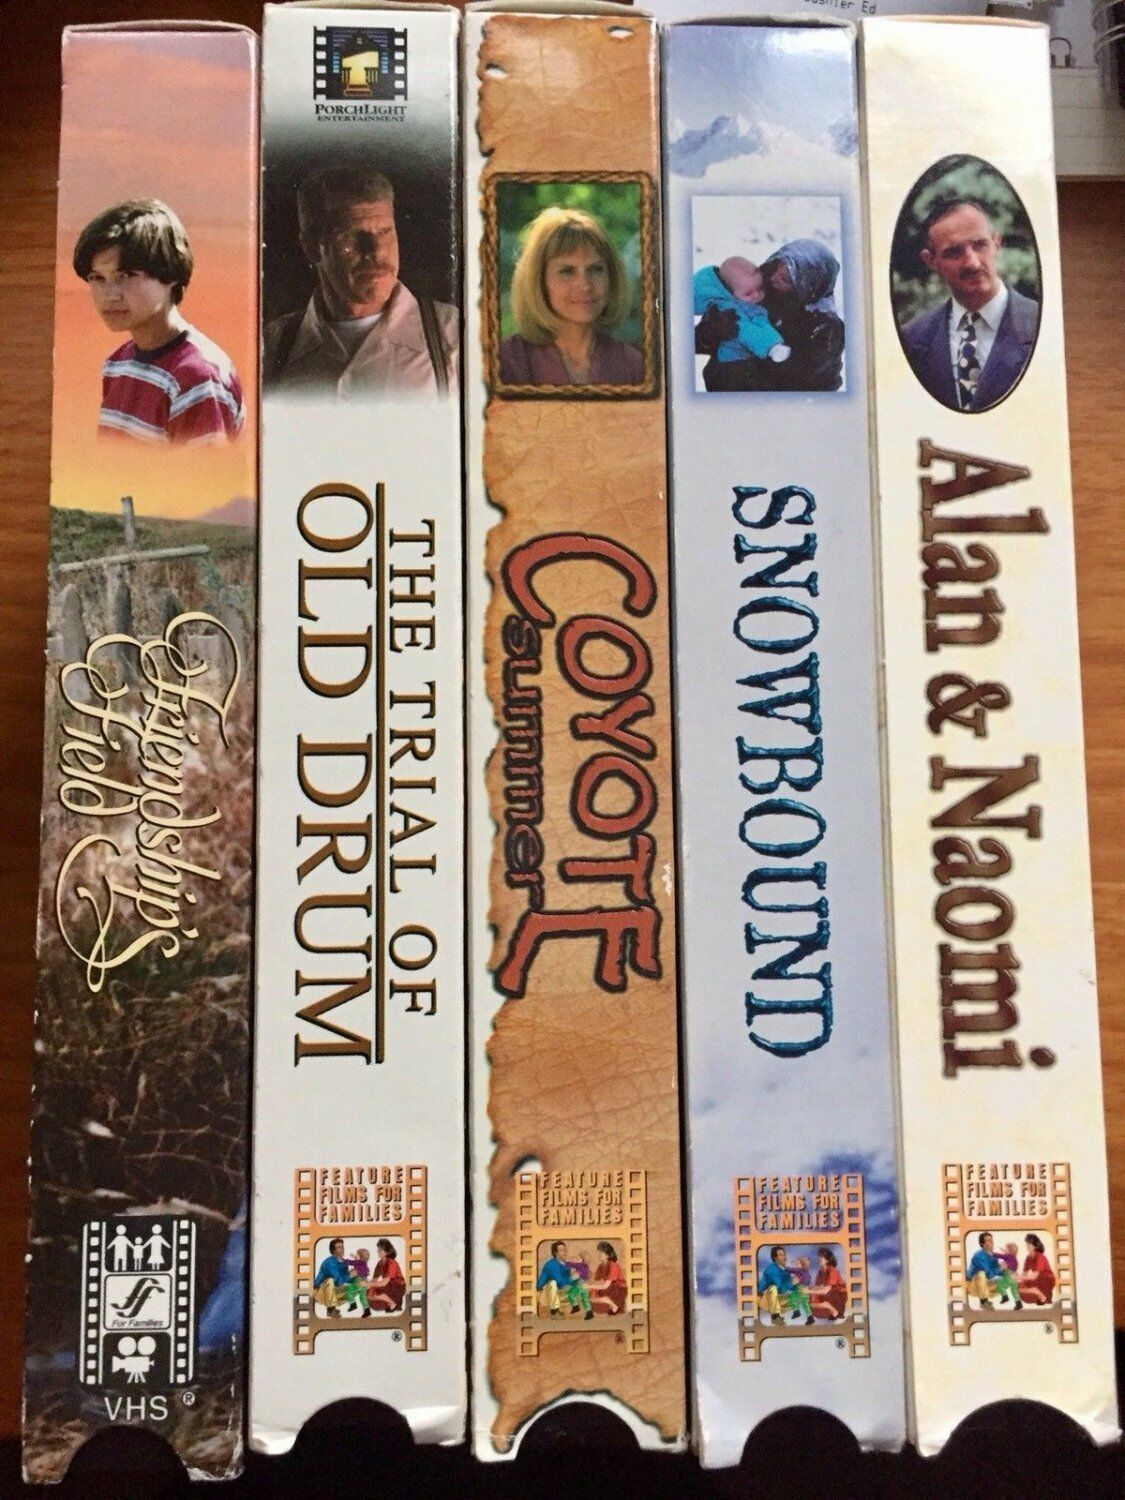 Primary image for Feature Films for Families VHS Movies Lot of 5 Christian Alan Naomi Coyote Drum